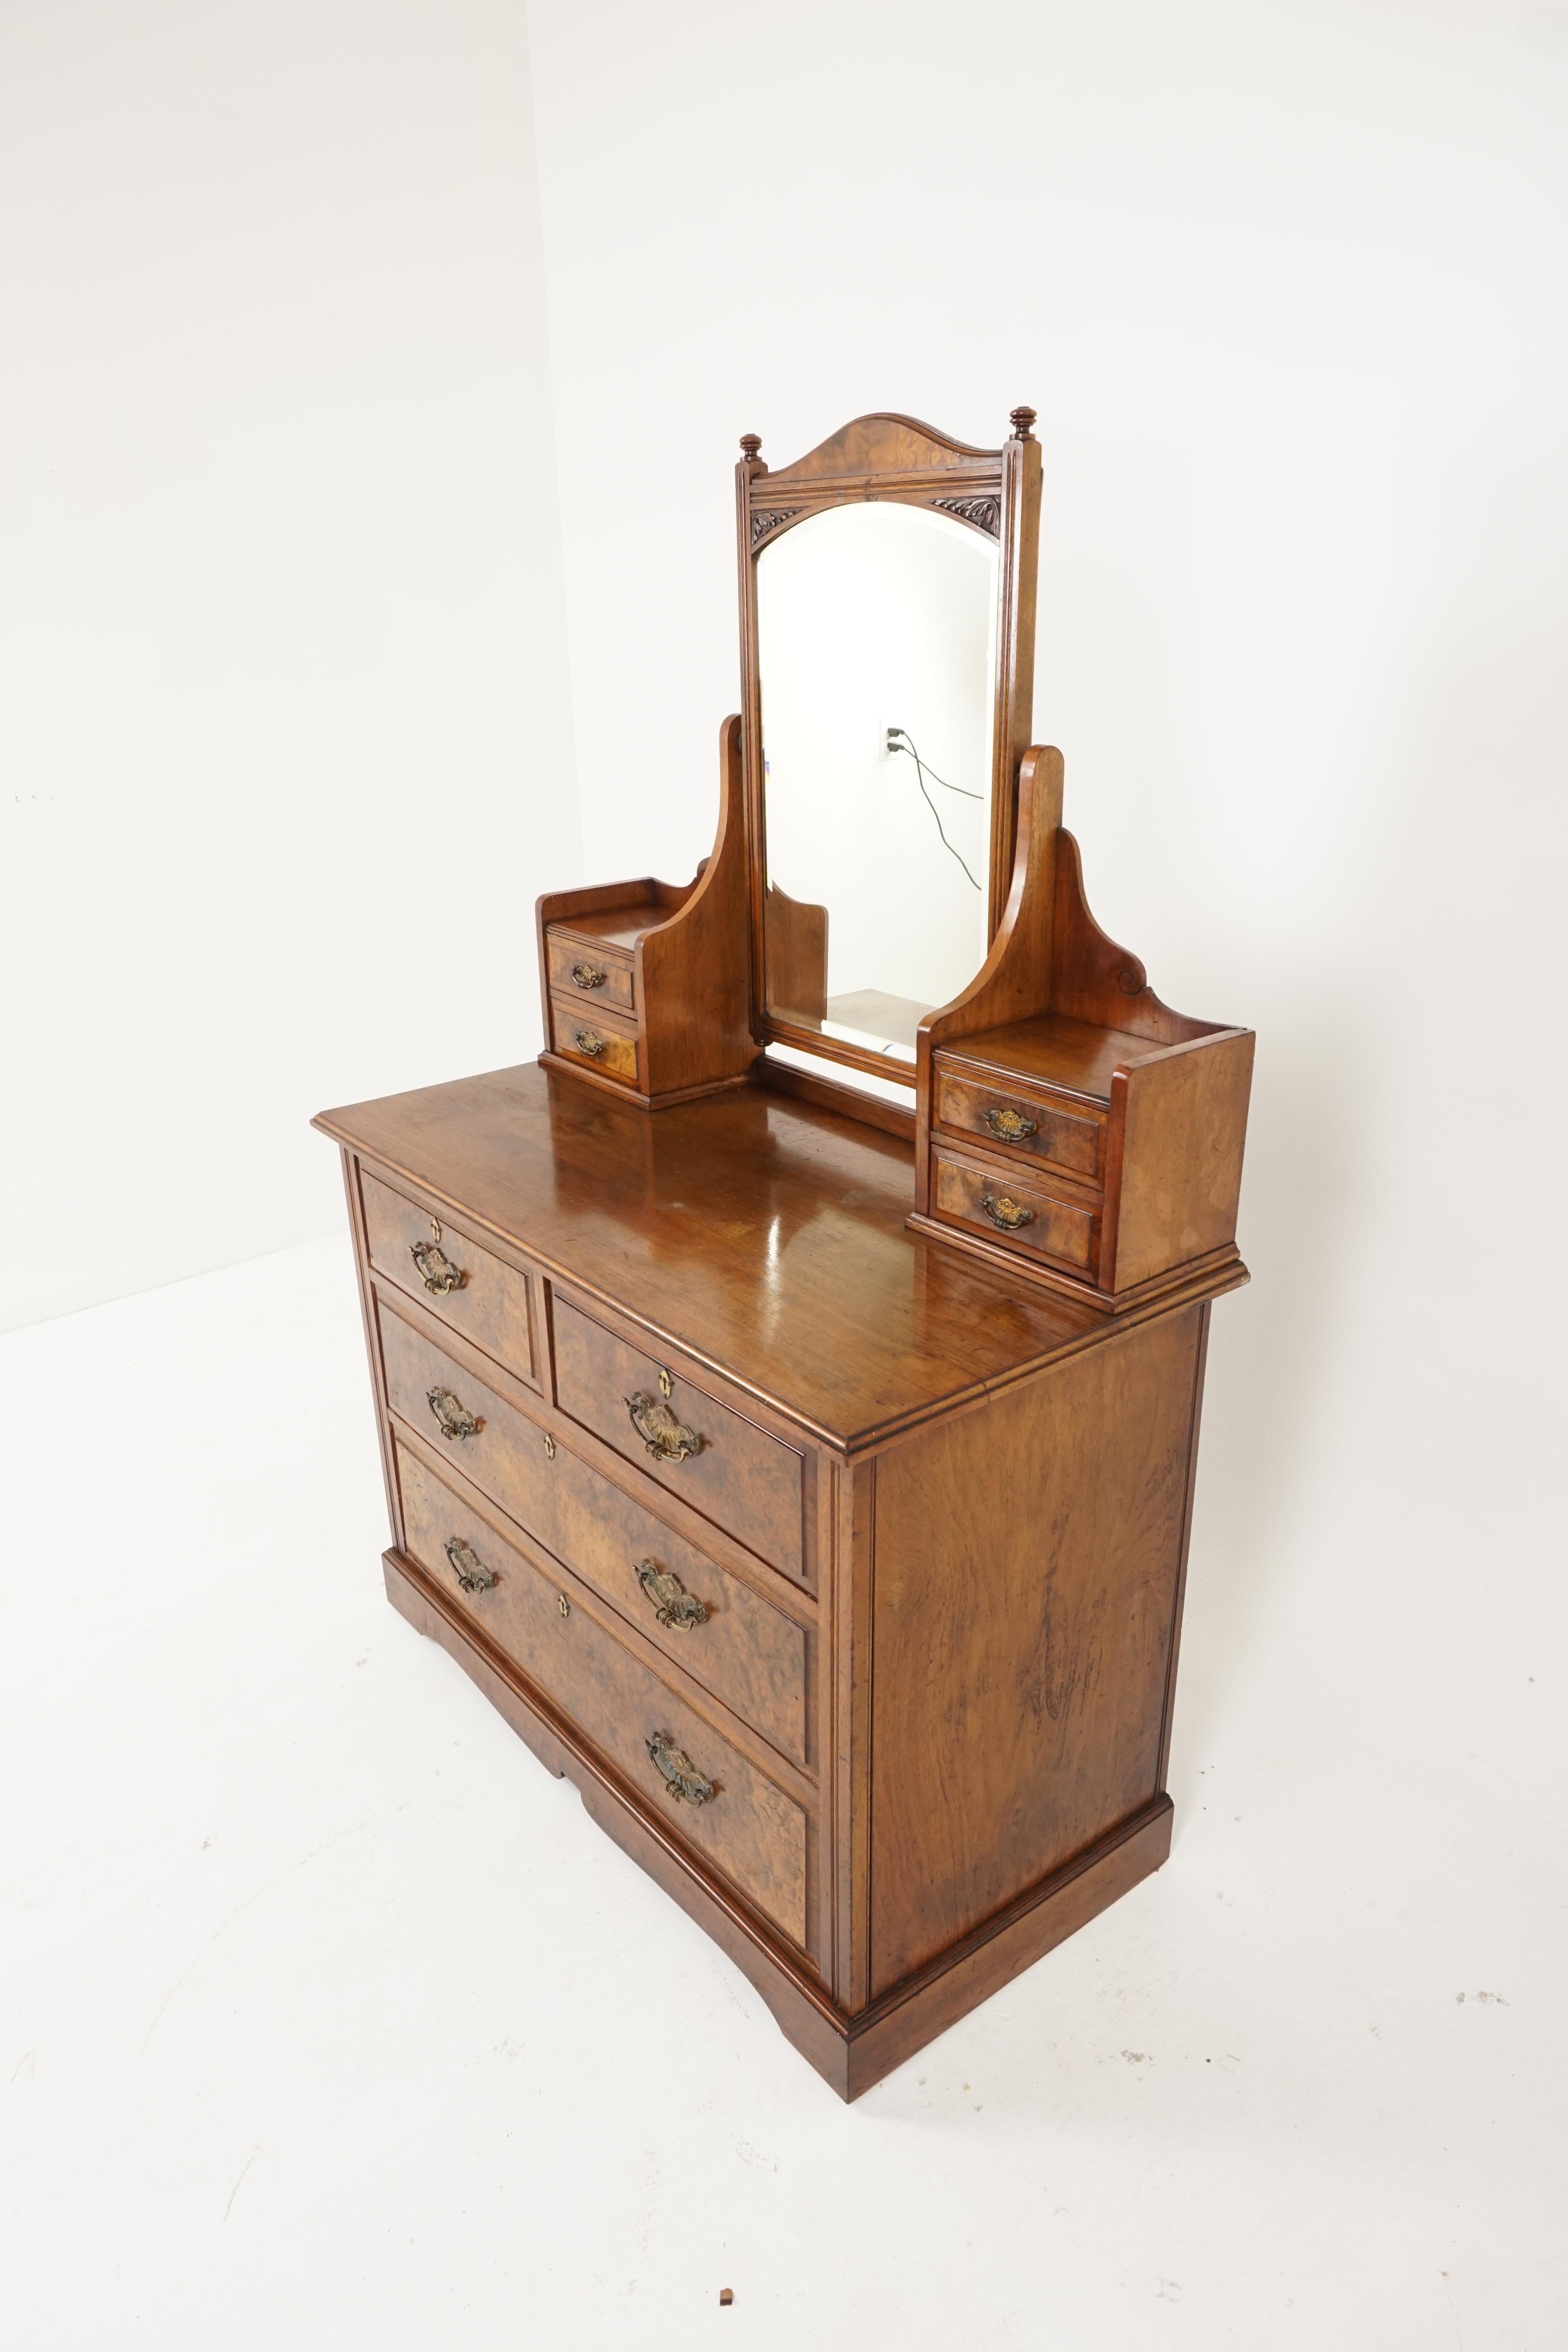 Antique burr walnut vanity, dressing chest, mirror, Scotland 1890, B2132

Scotland, 1890
Solid walnut and veneer
Original finish
Having a central beveled mirror
Four small burr walnut drawers
Below this the chest has two short drawers to the